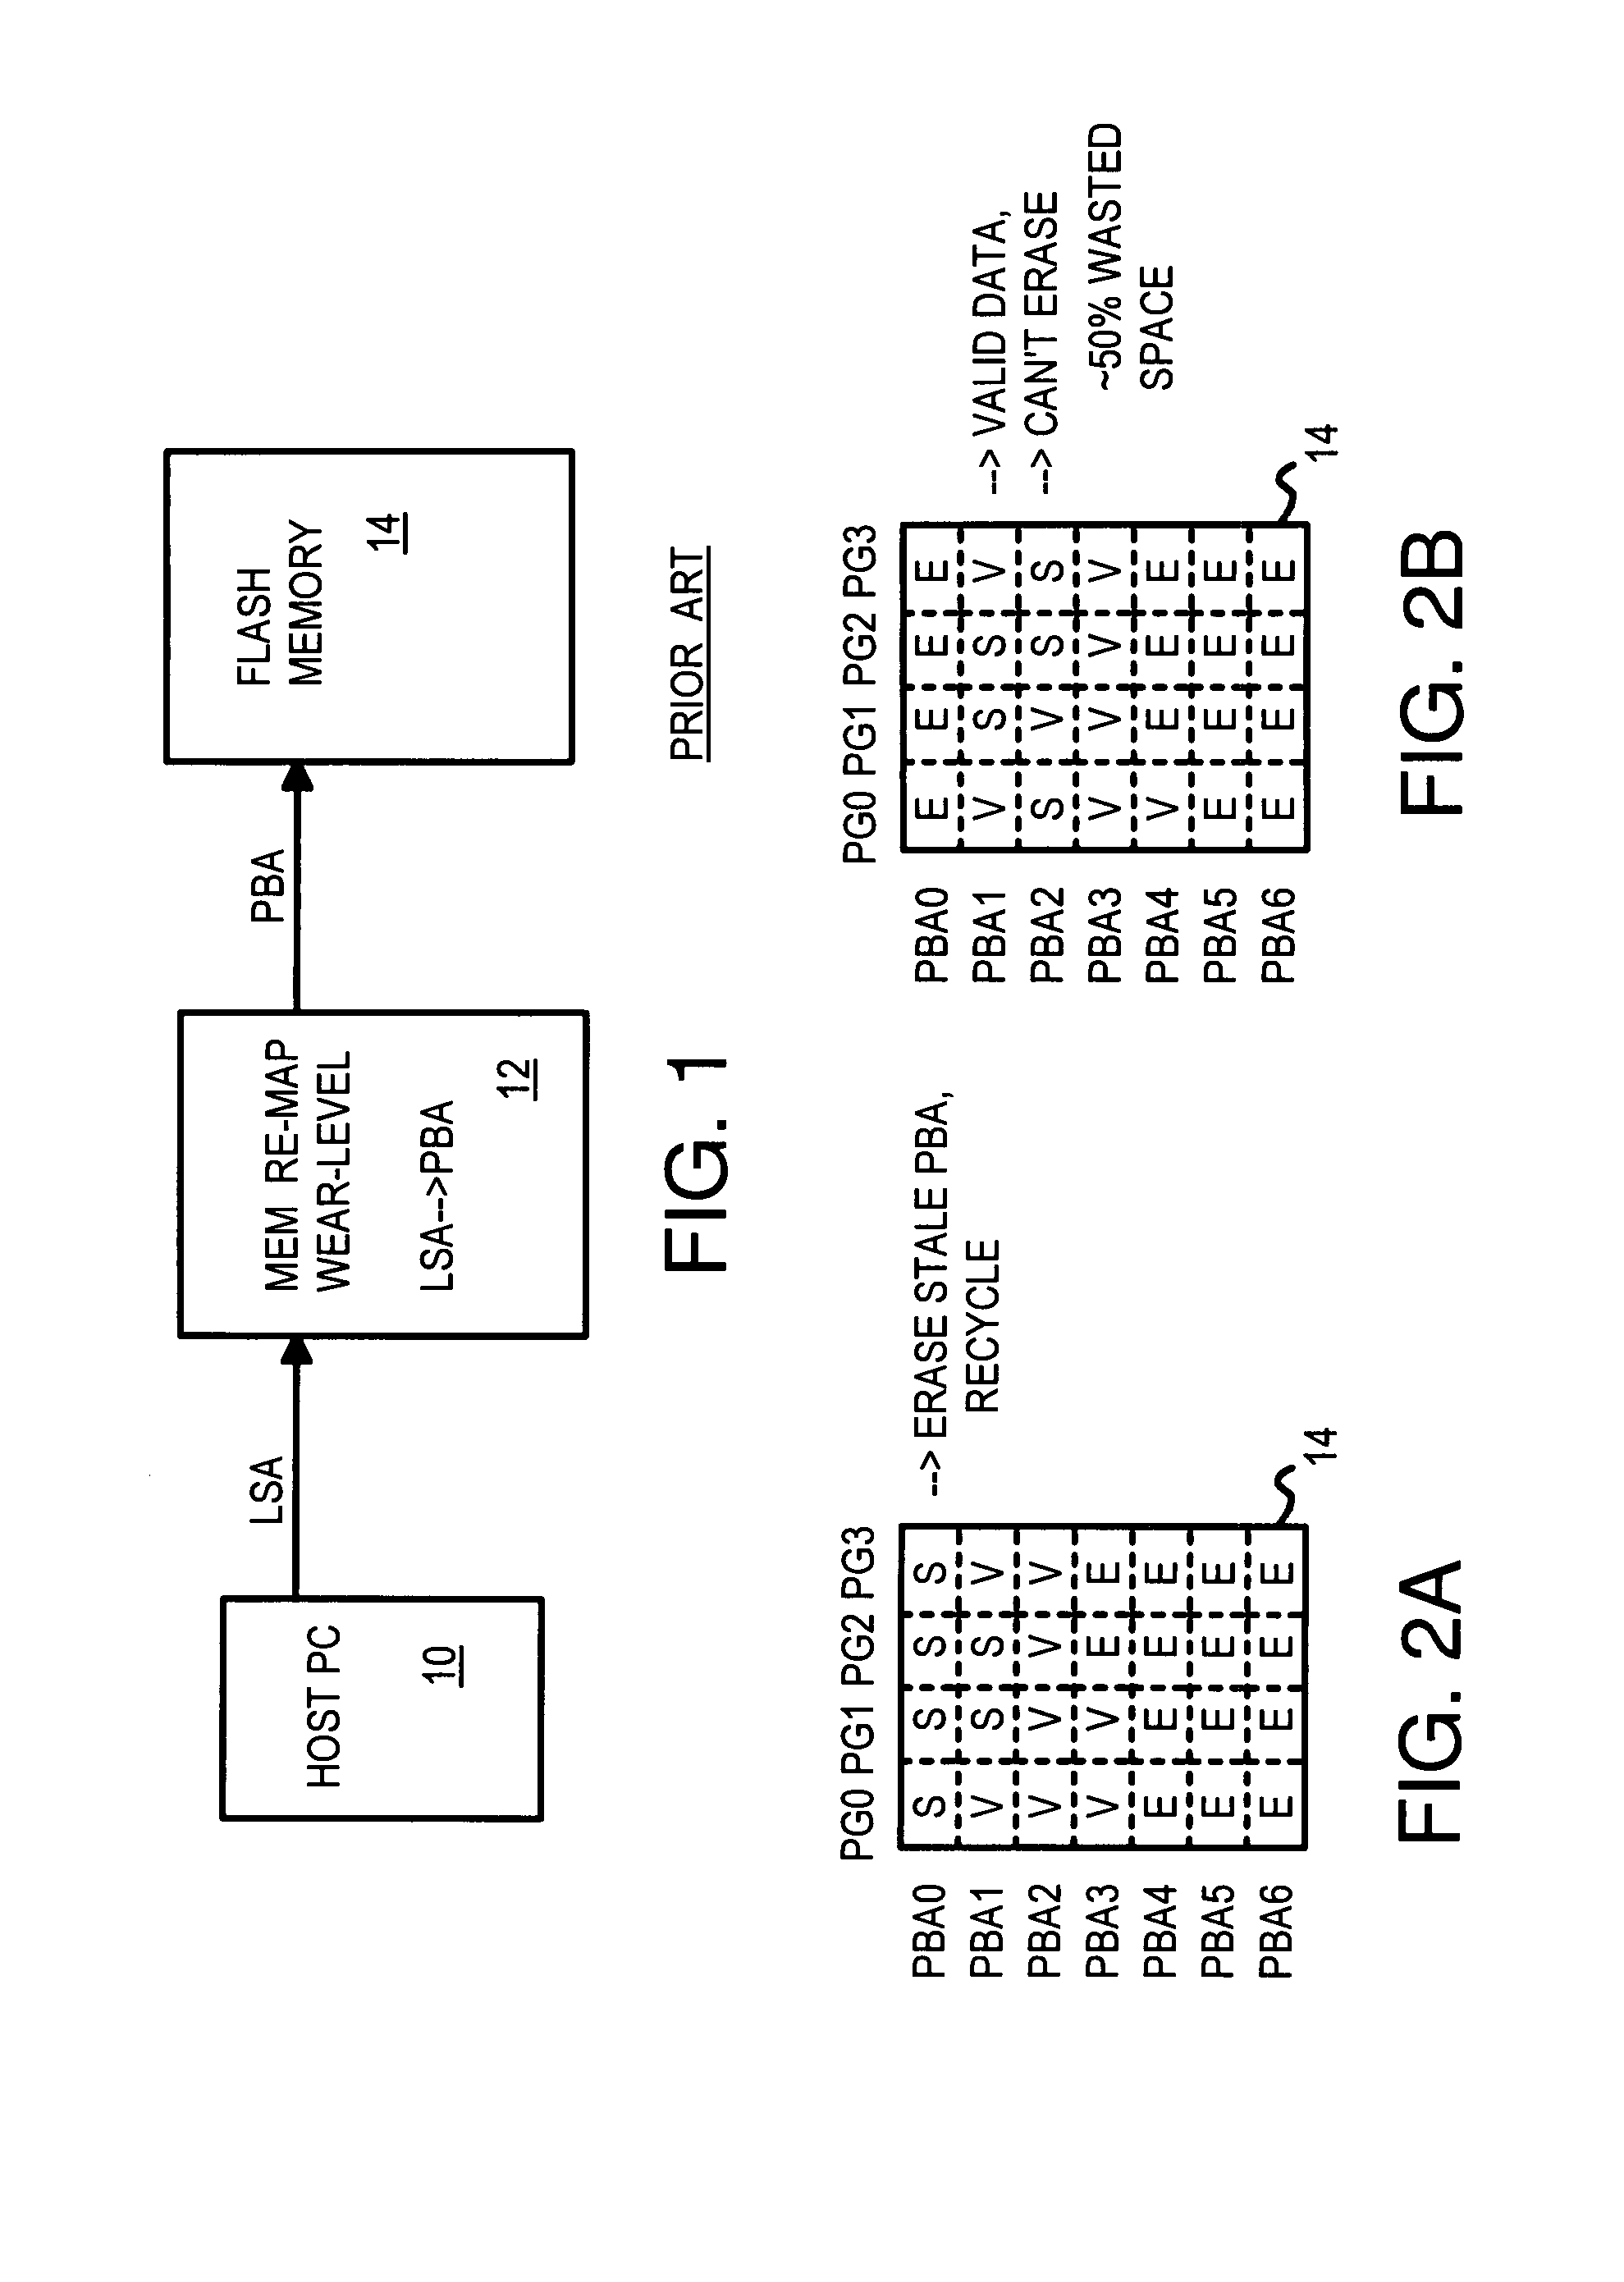 Flash Module with Plane-Interleaved Sequential Writes to Restricted-Write Flash Chips